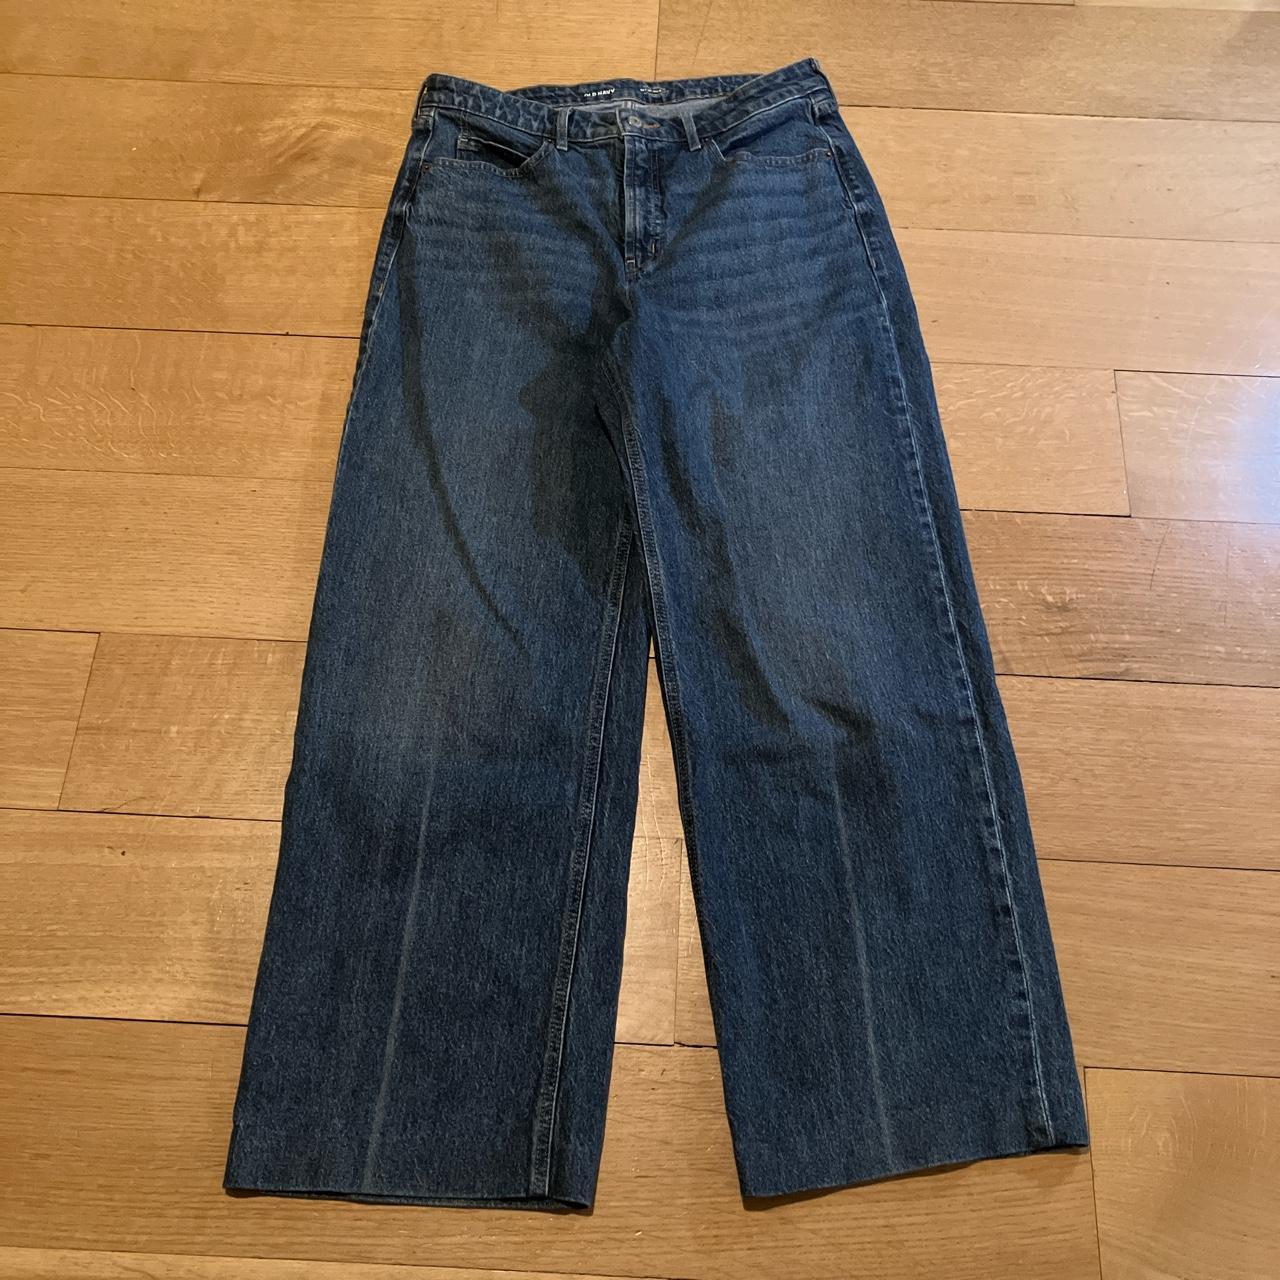 Old Navy Men's Blue and Navy Jeans